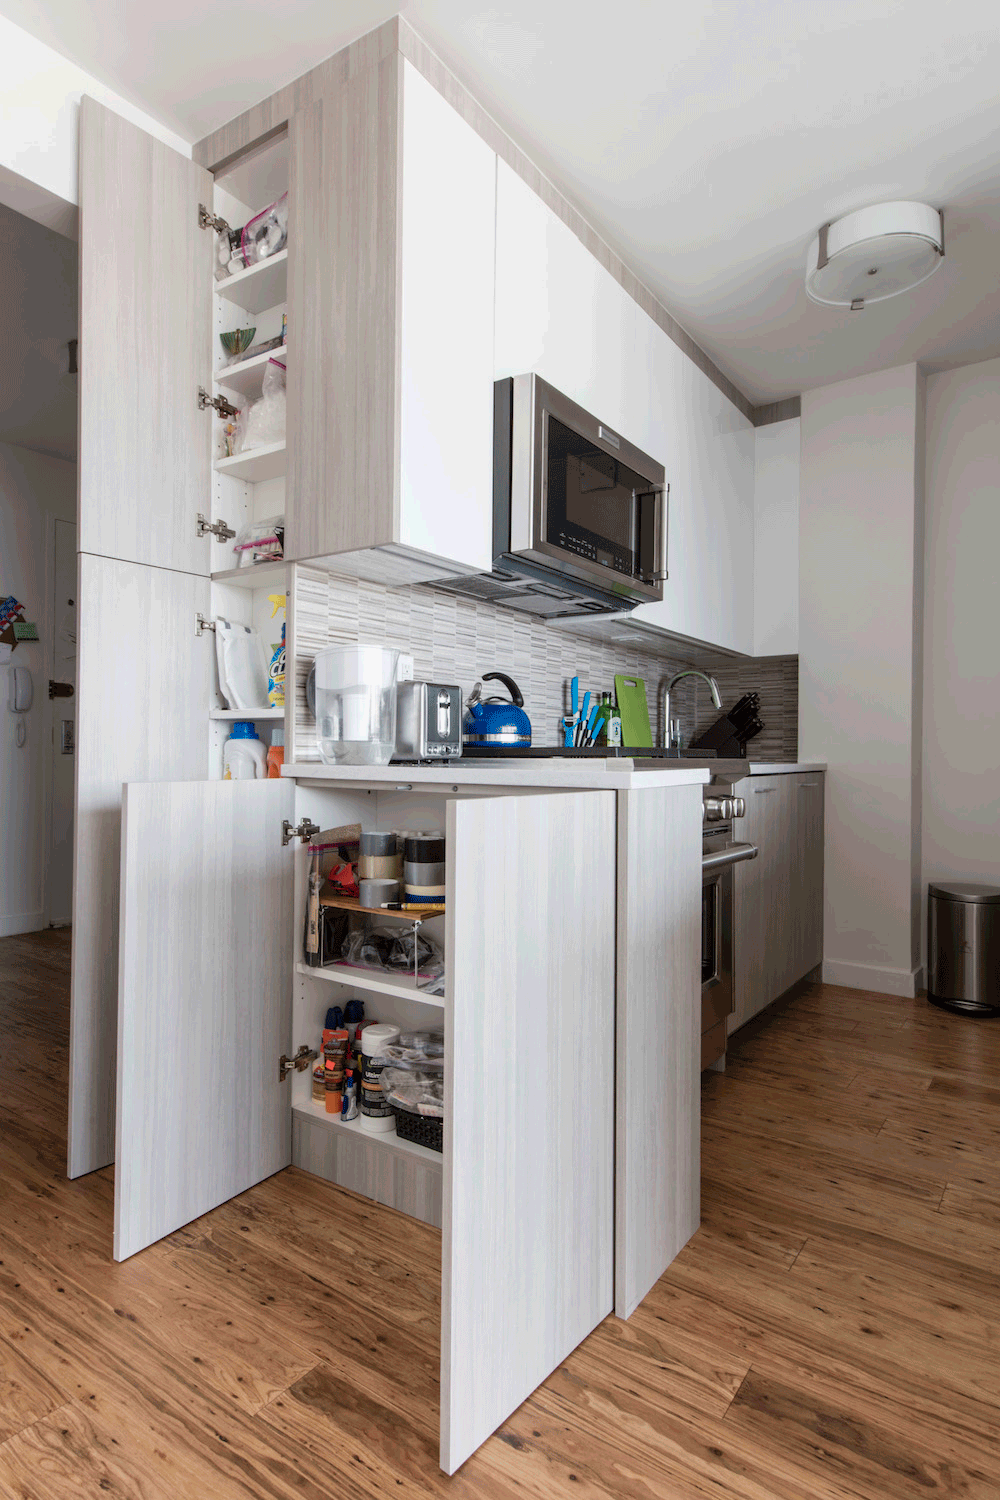 white overhead kitchen cabinets and light gray under counter cabinets with white countertop and gray backsplash tiles and hardwood floors and flush mounted light after renovation